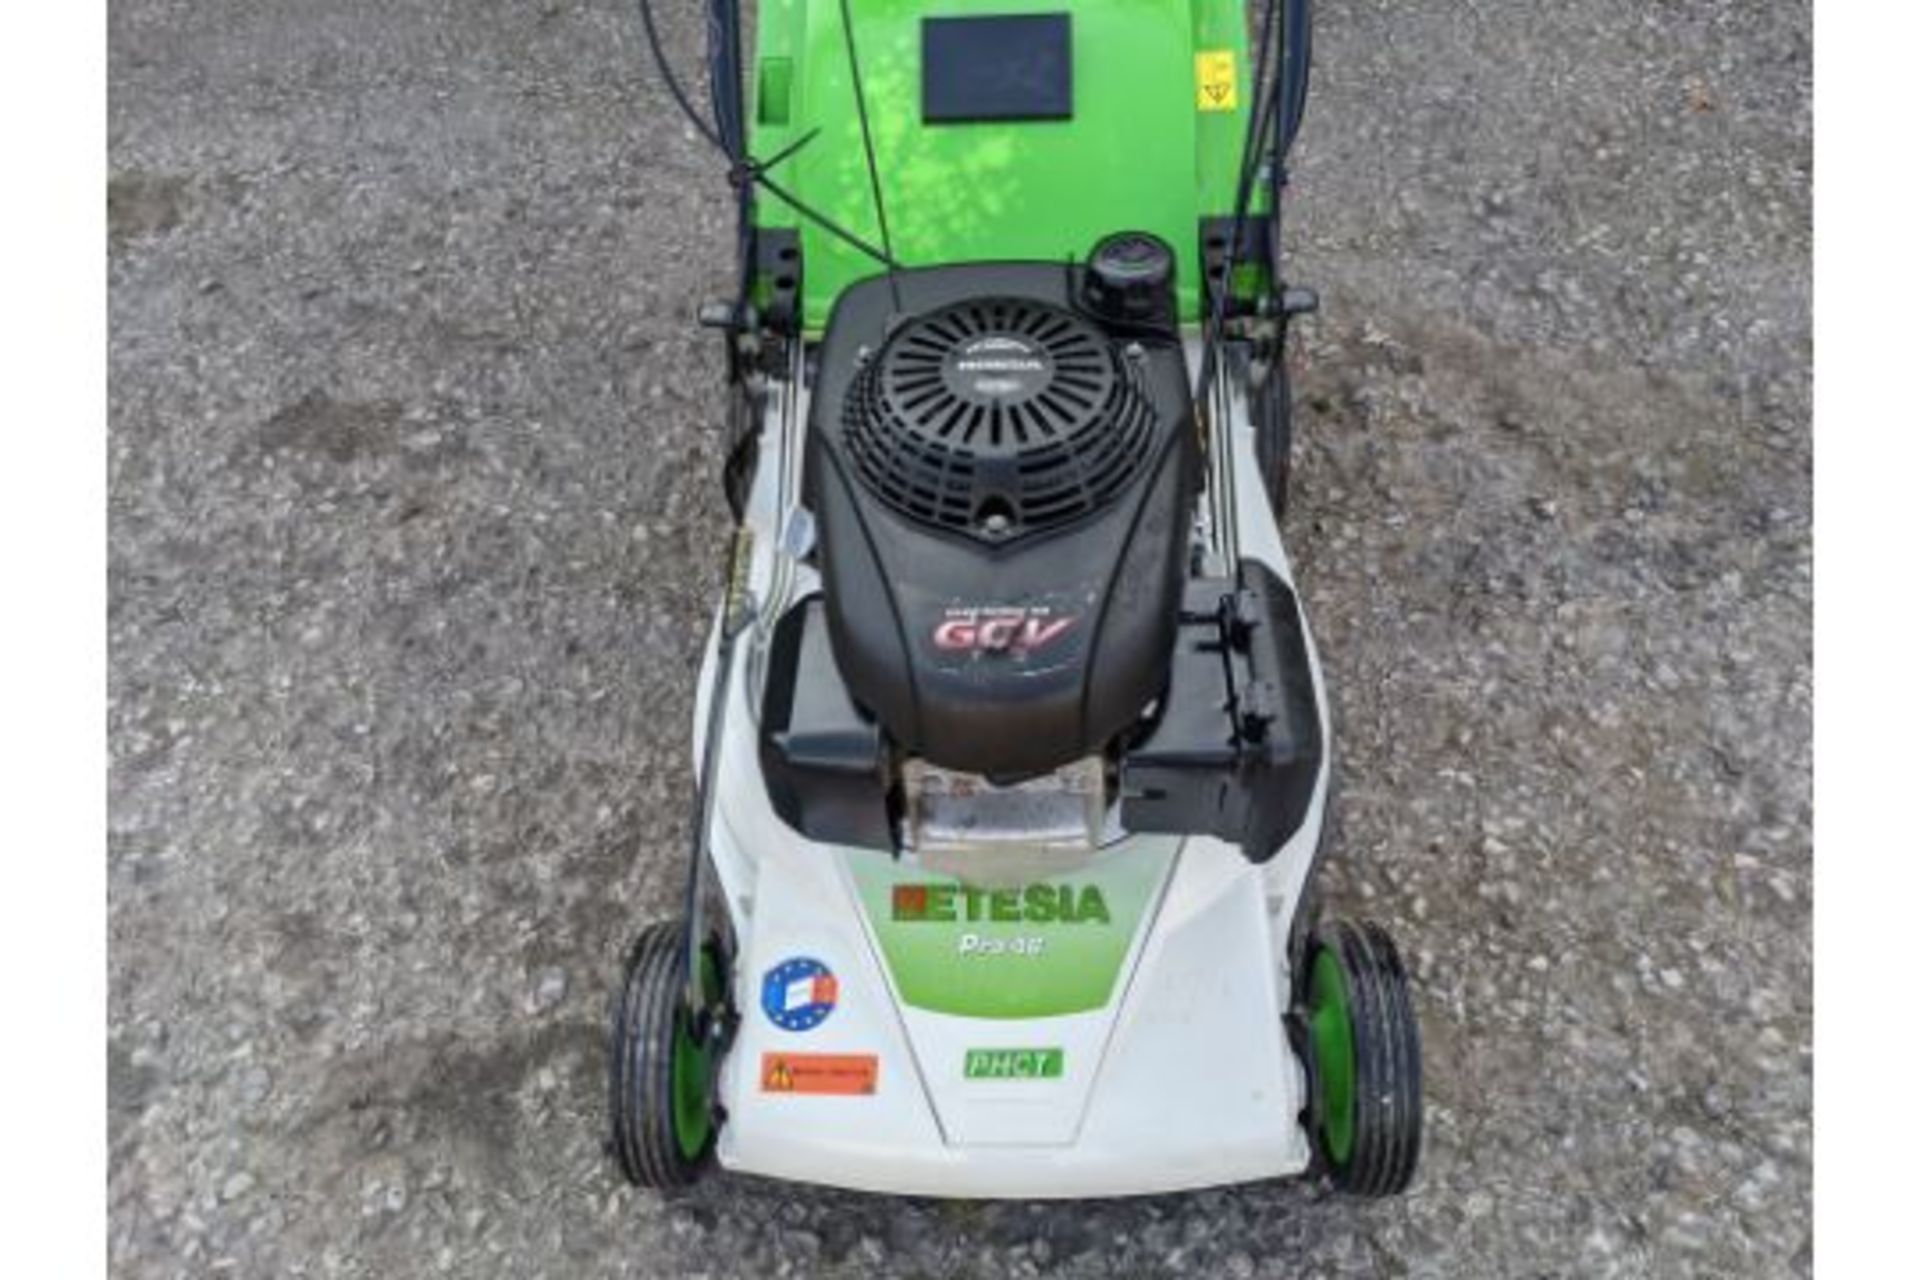 2019 Etesia Pro 46 PHCT 18" Self Propelled Lawn Mower - Image 2 of 5